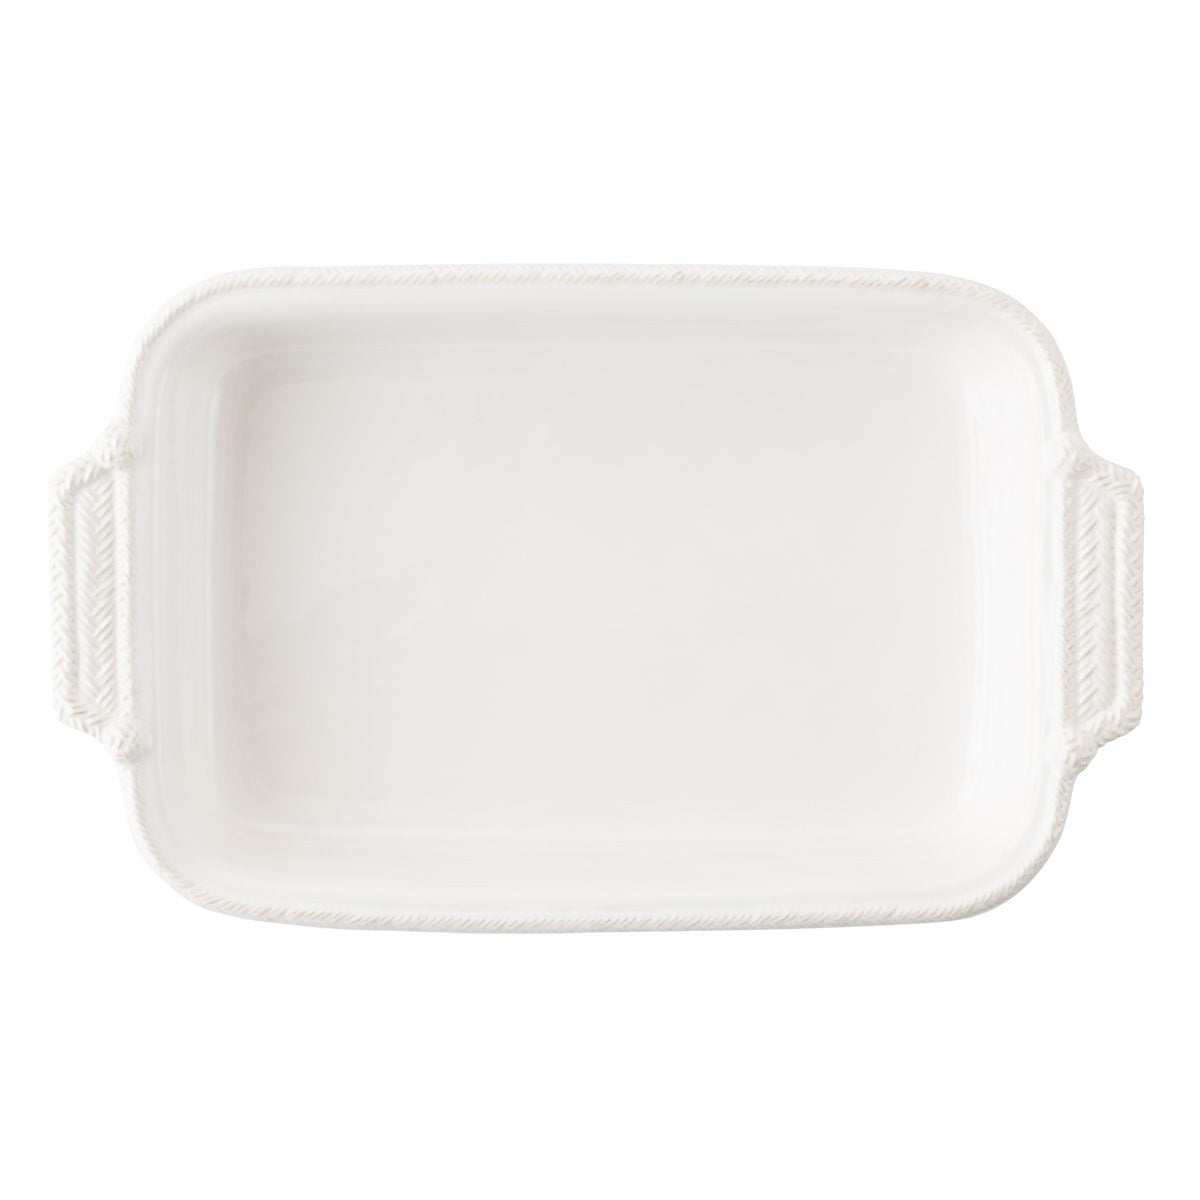 le panier rectangle baking dish on a white background